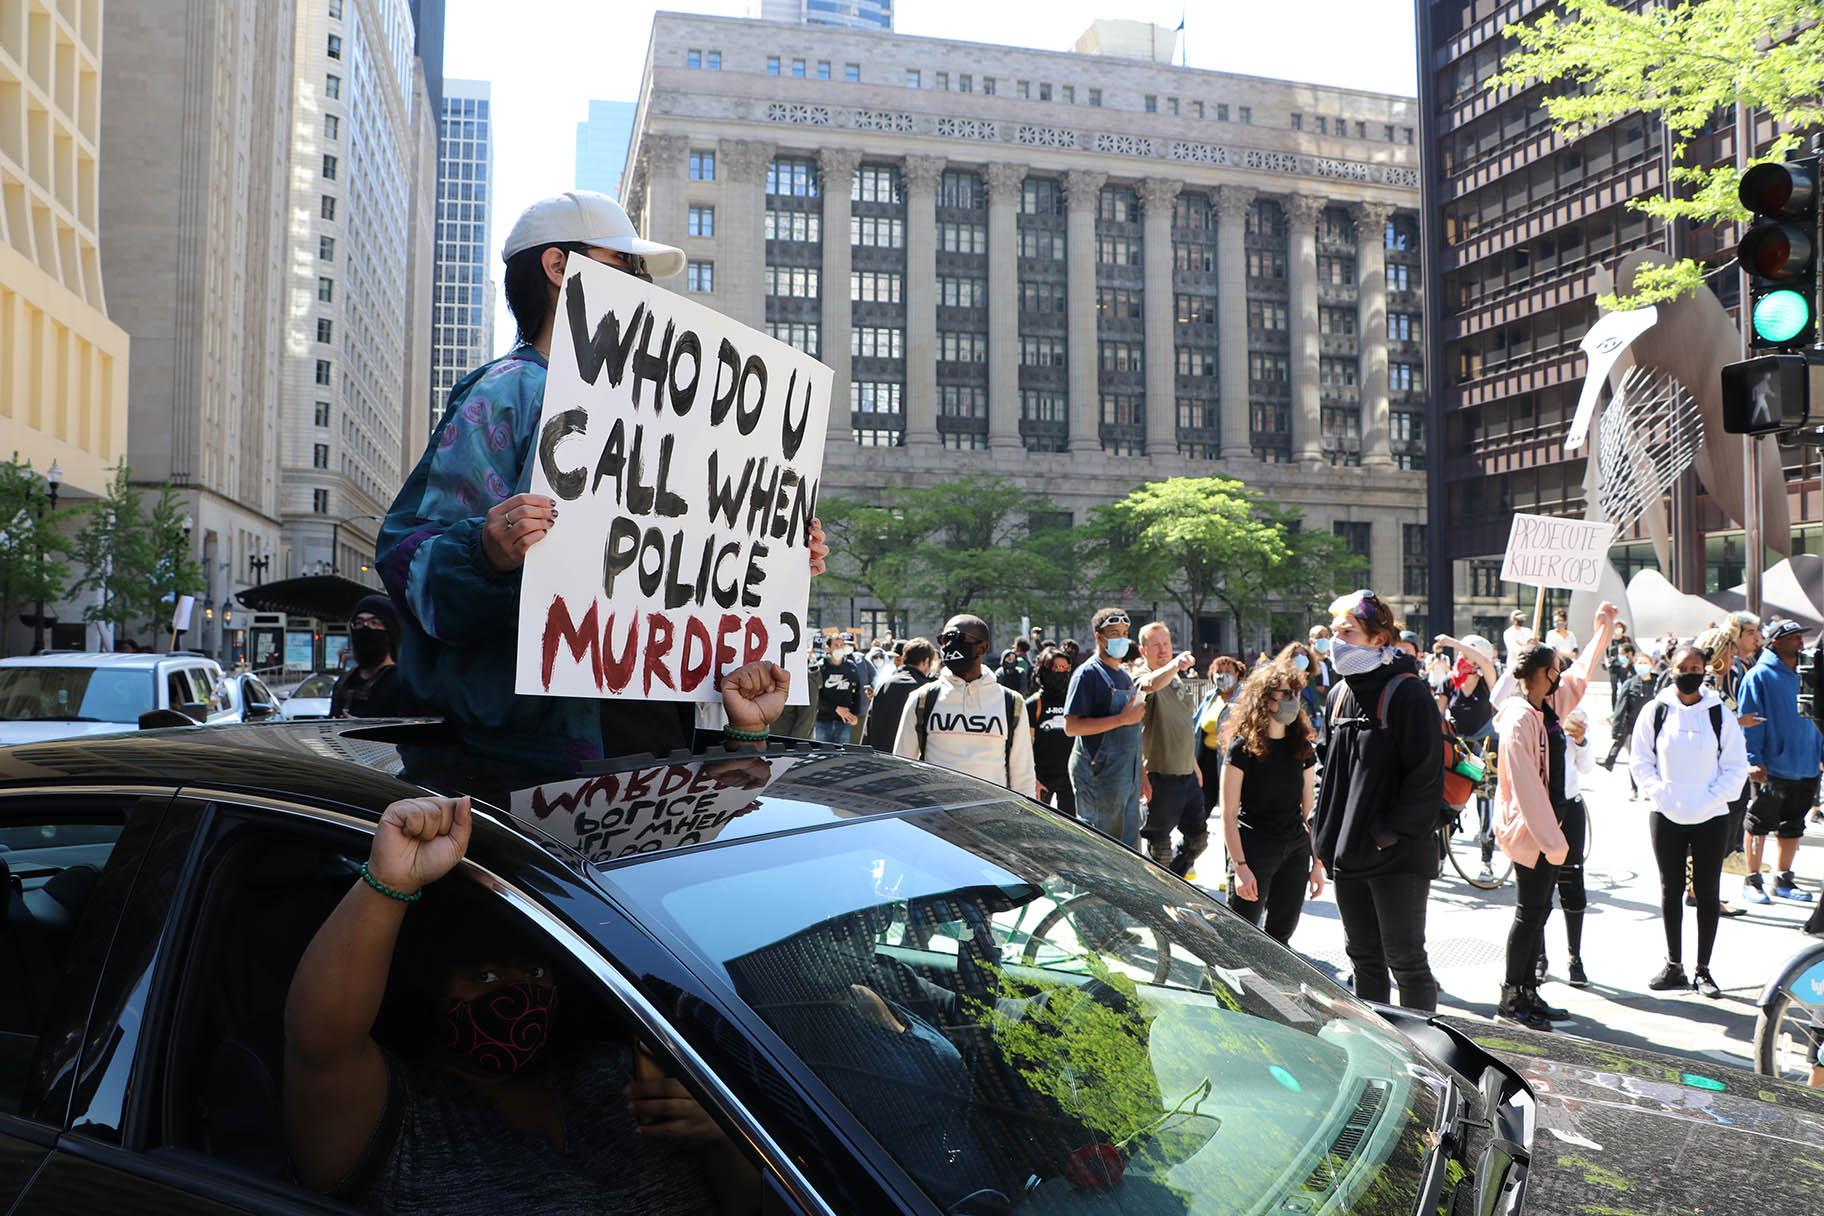 Several motorists show support by honking their horns and holding signs while circling Daley Plaza. (Evan Garcia / WTTW News)